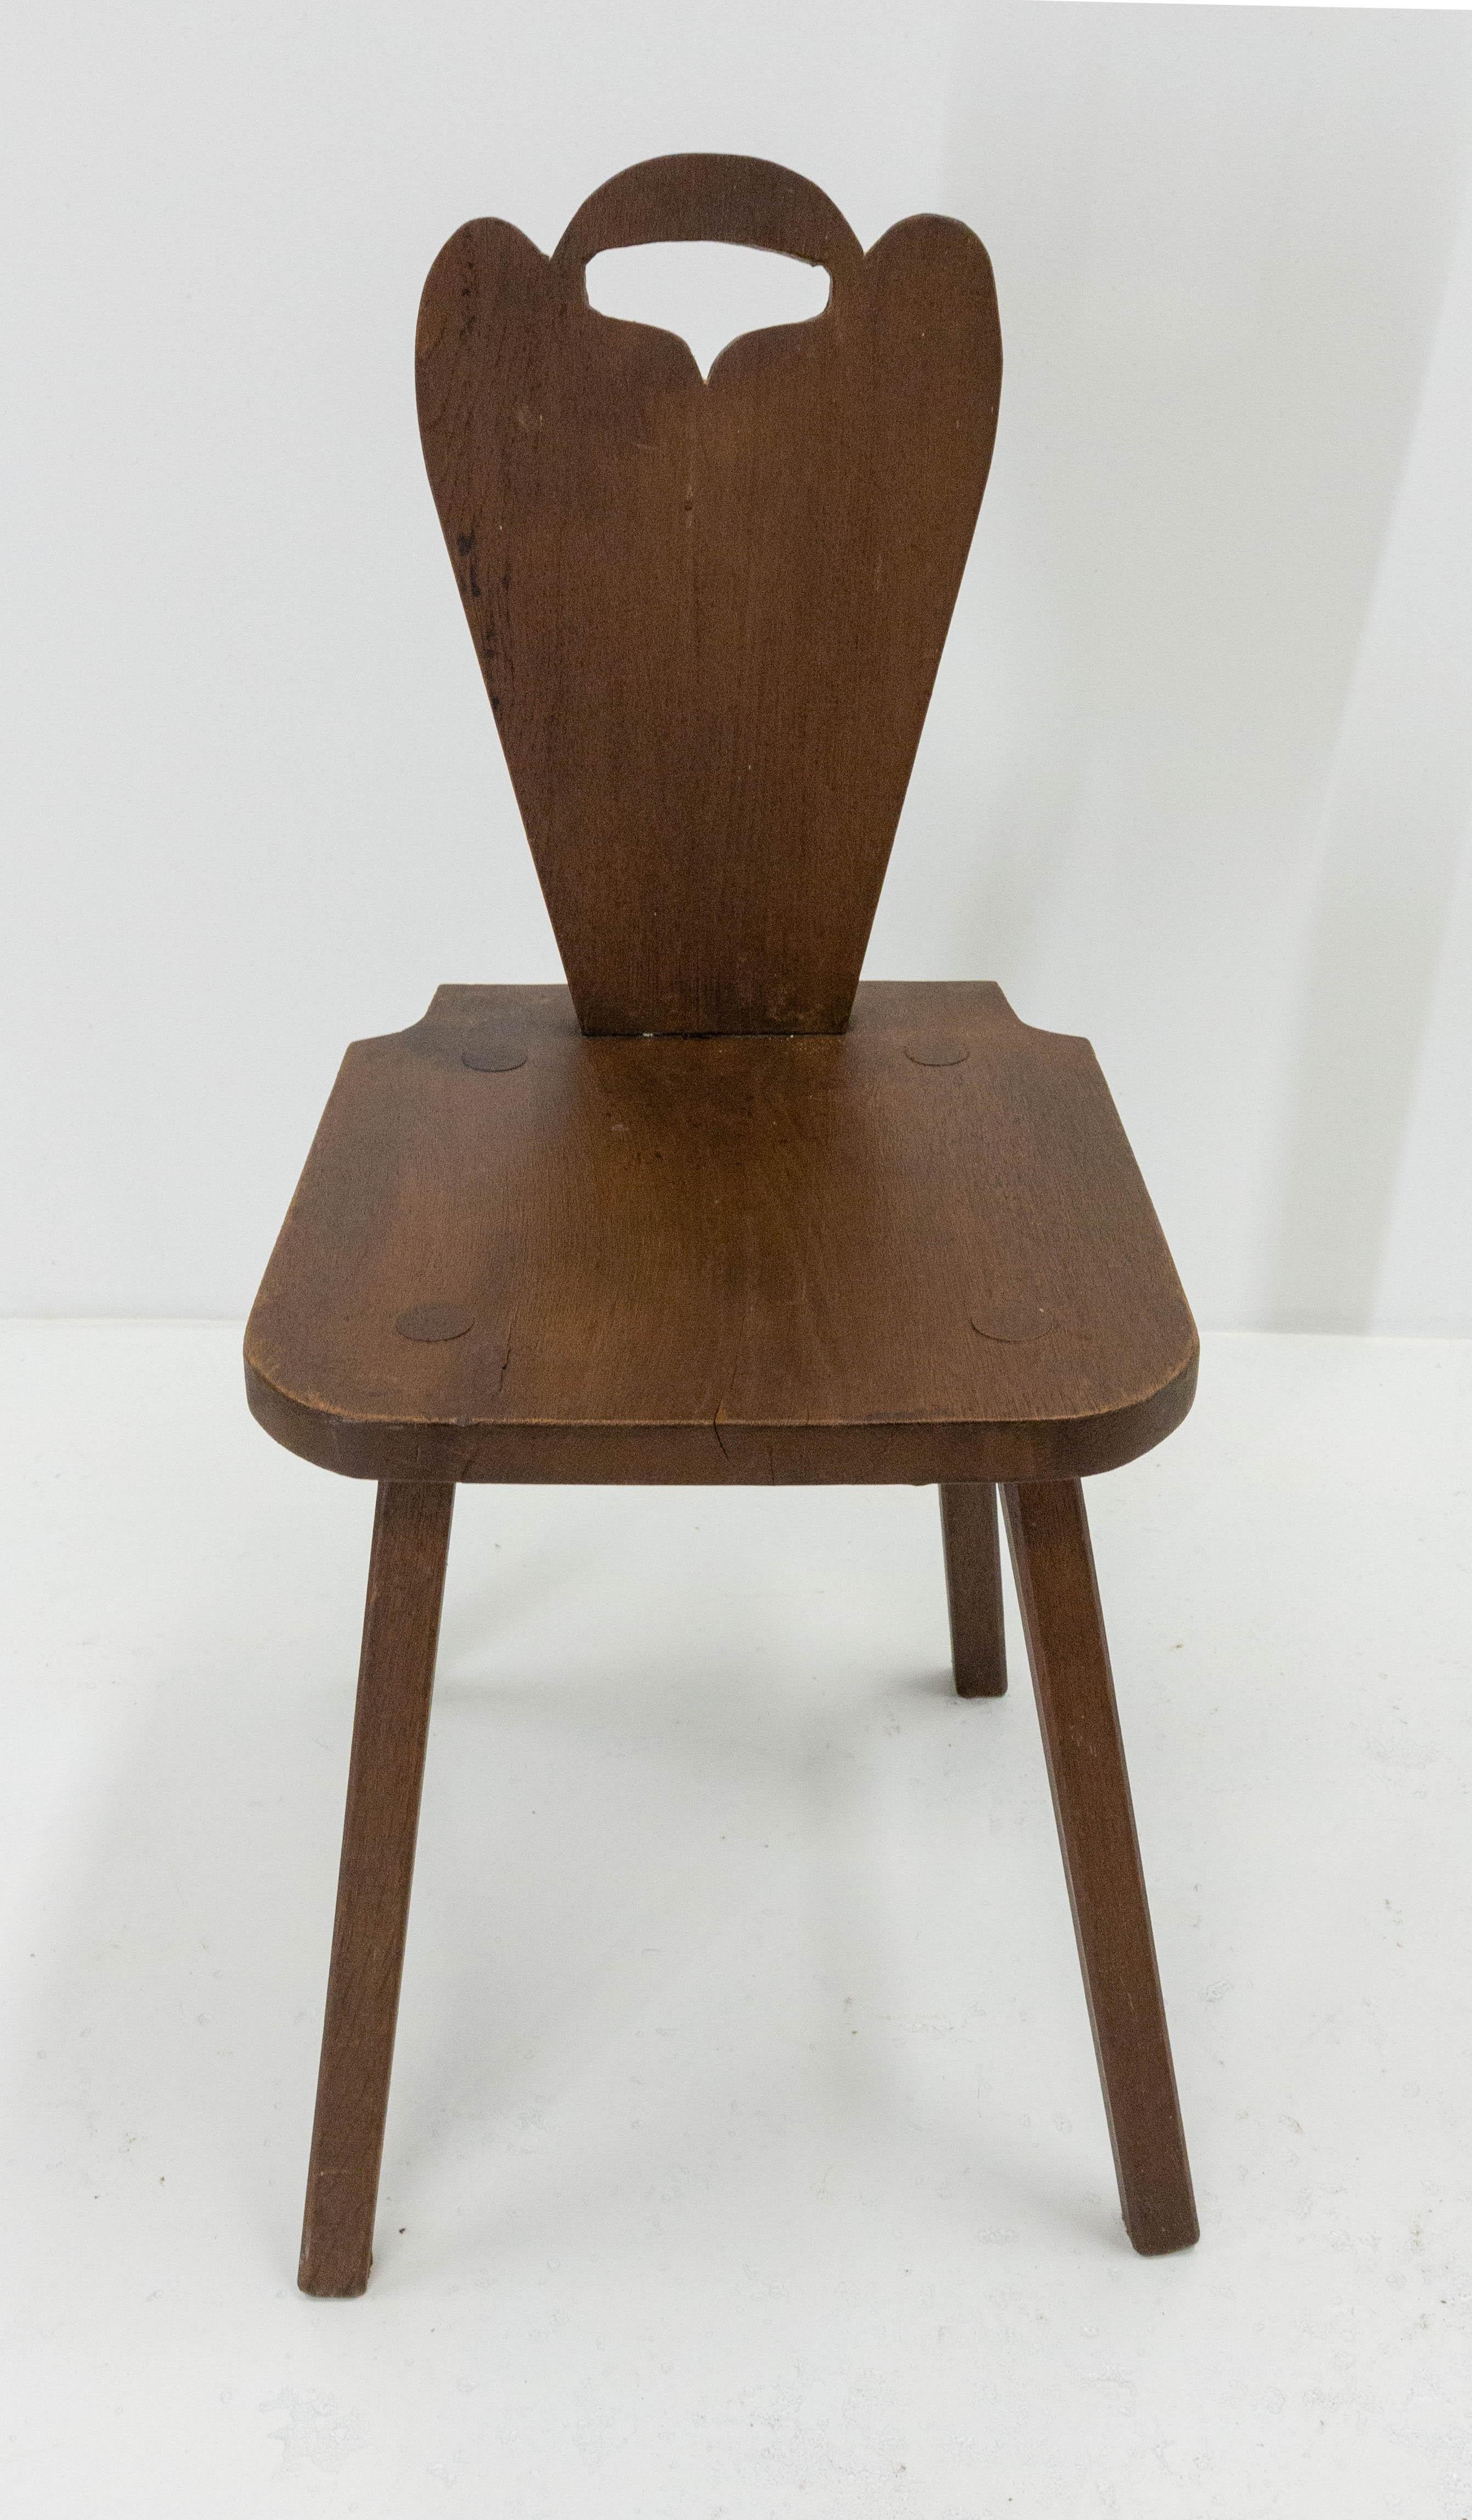 20th Century Six Dining Chairs Swiss Alp Escabelles Oak Brutalist Style, French 1950